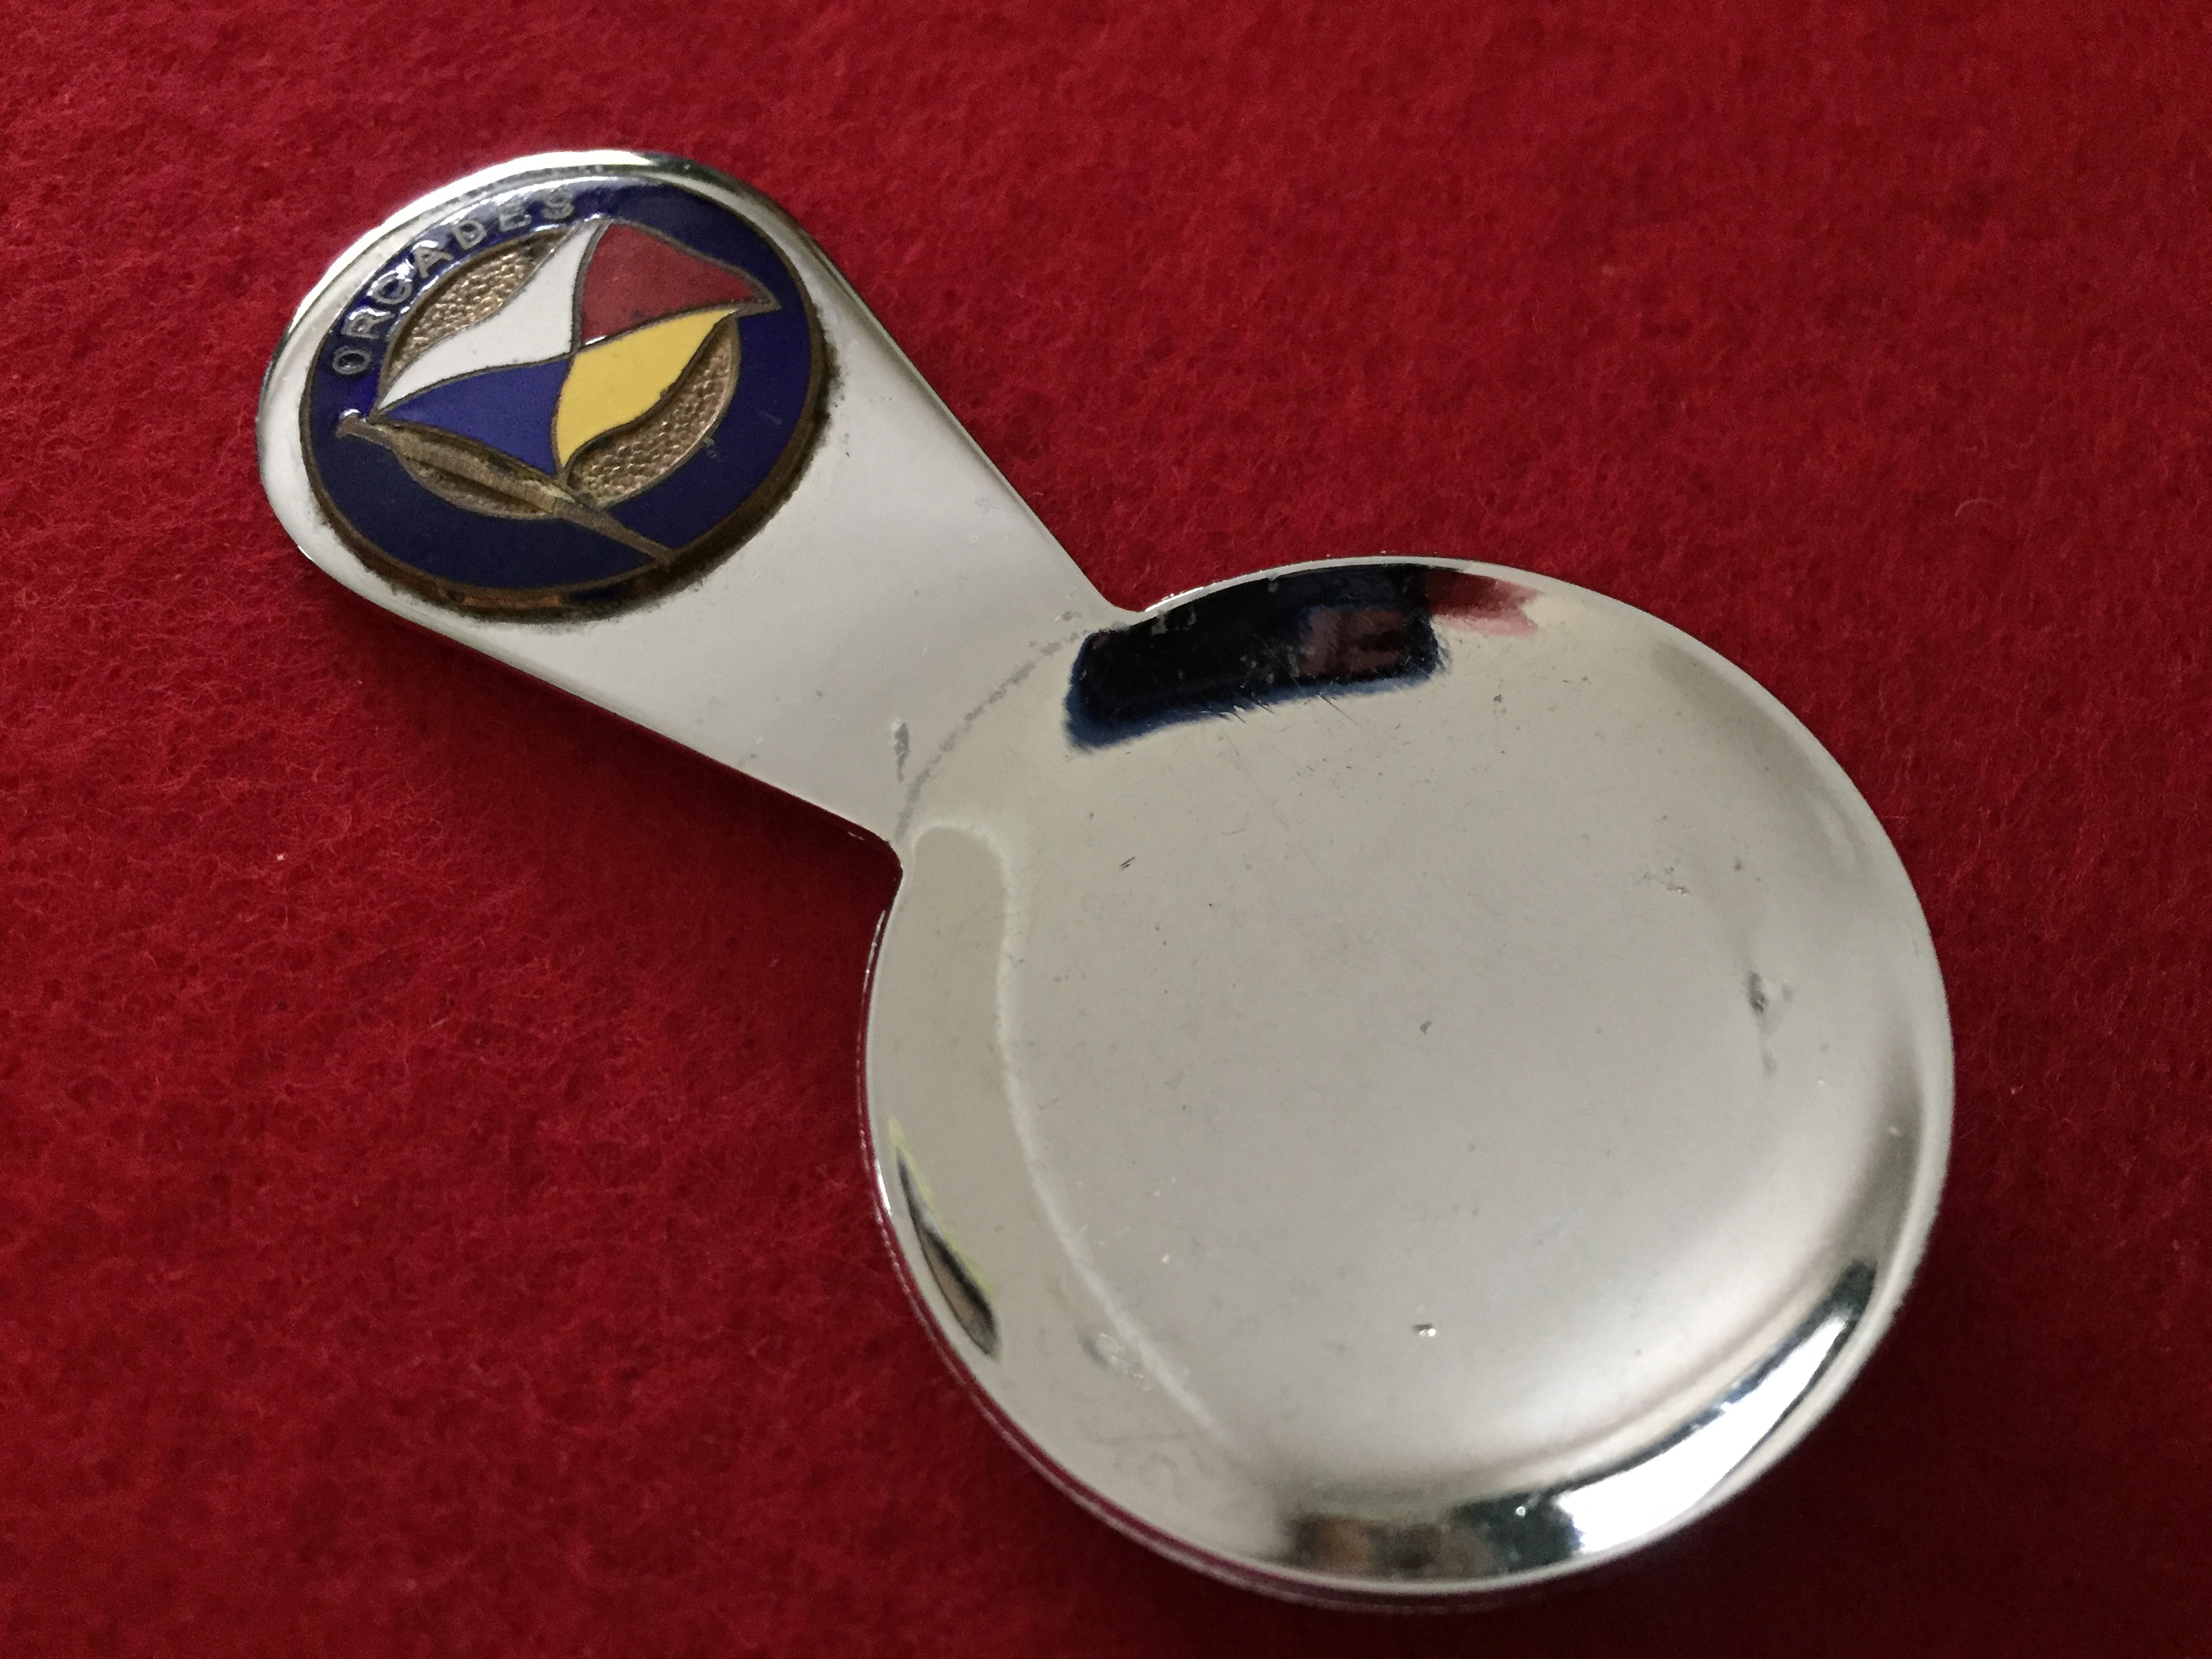 SOUVENIR TEA CADDY SPOON FROM THE P&O LINE VESSEL THE ORCADES   